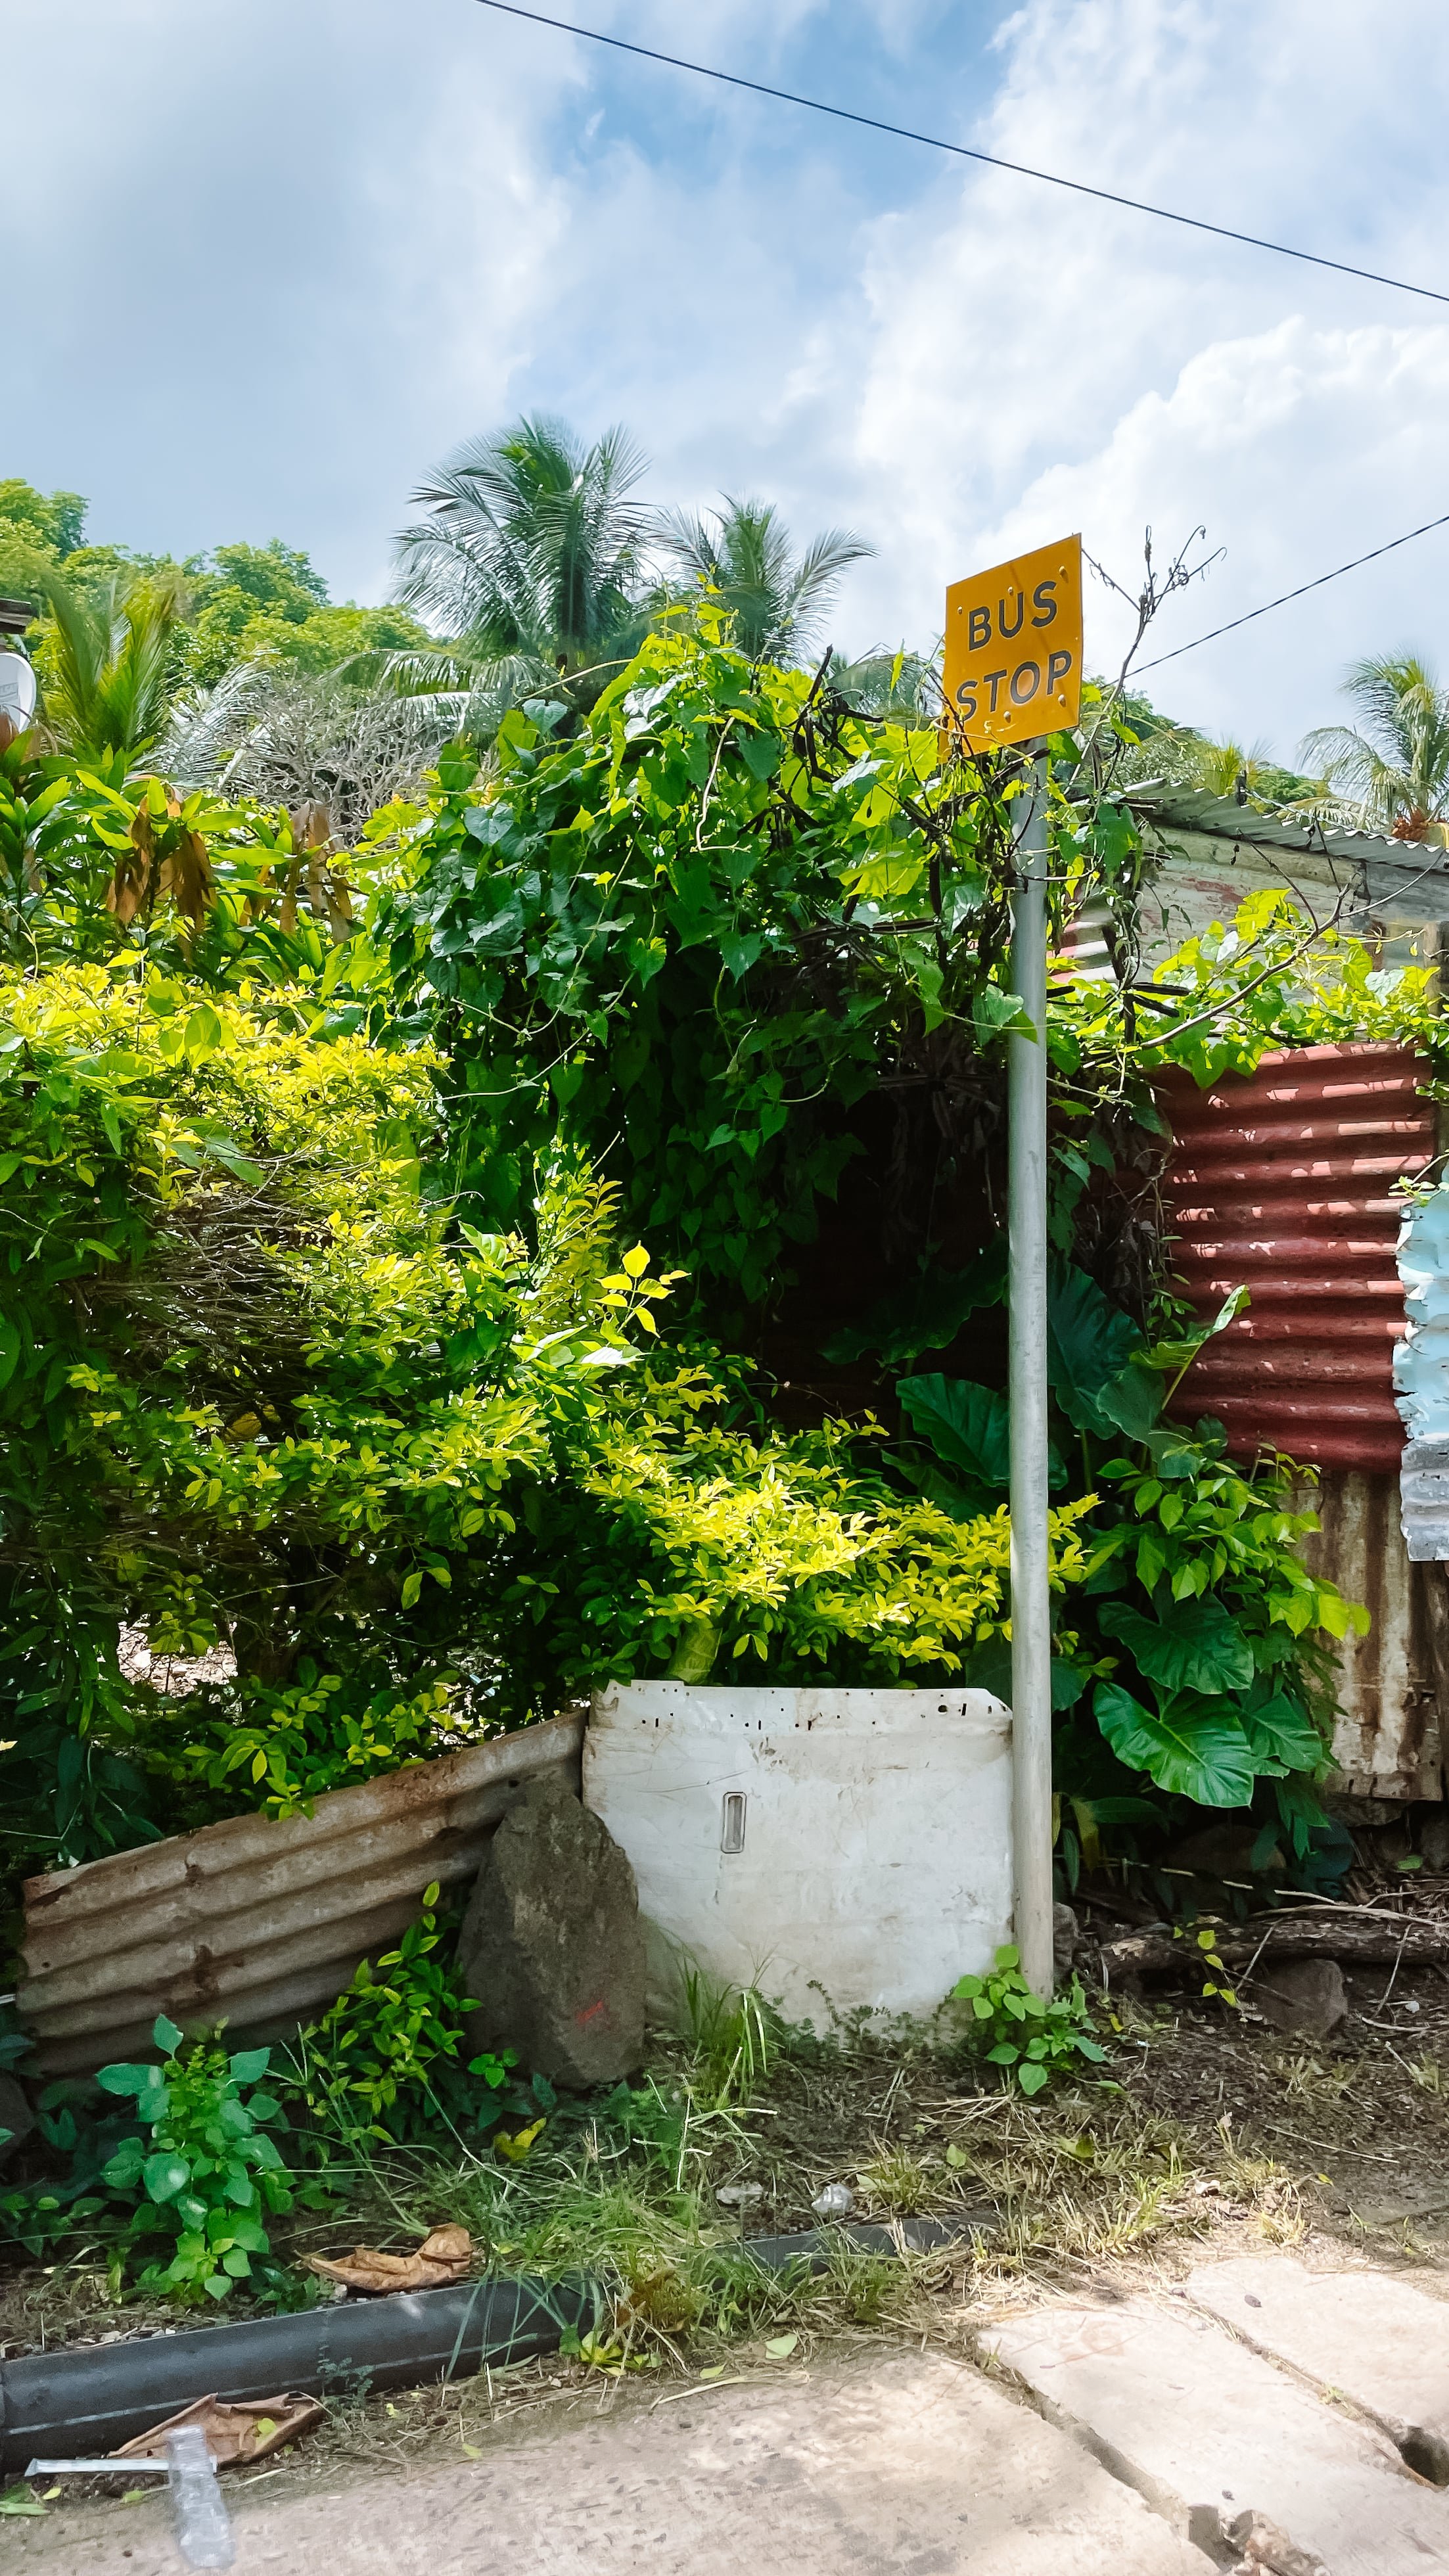 common road signs in mauritius.jpg